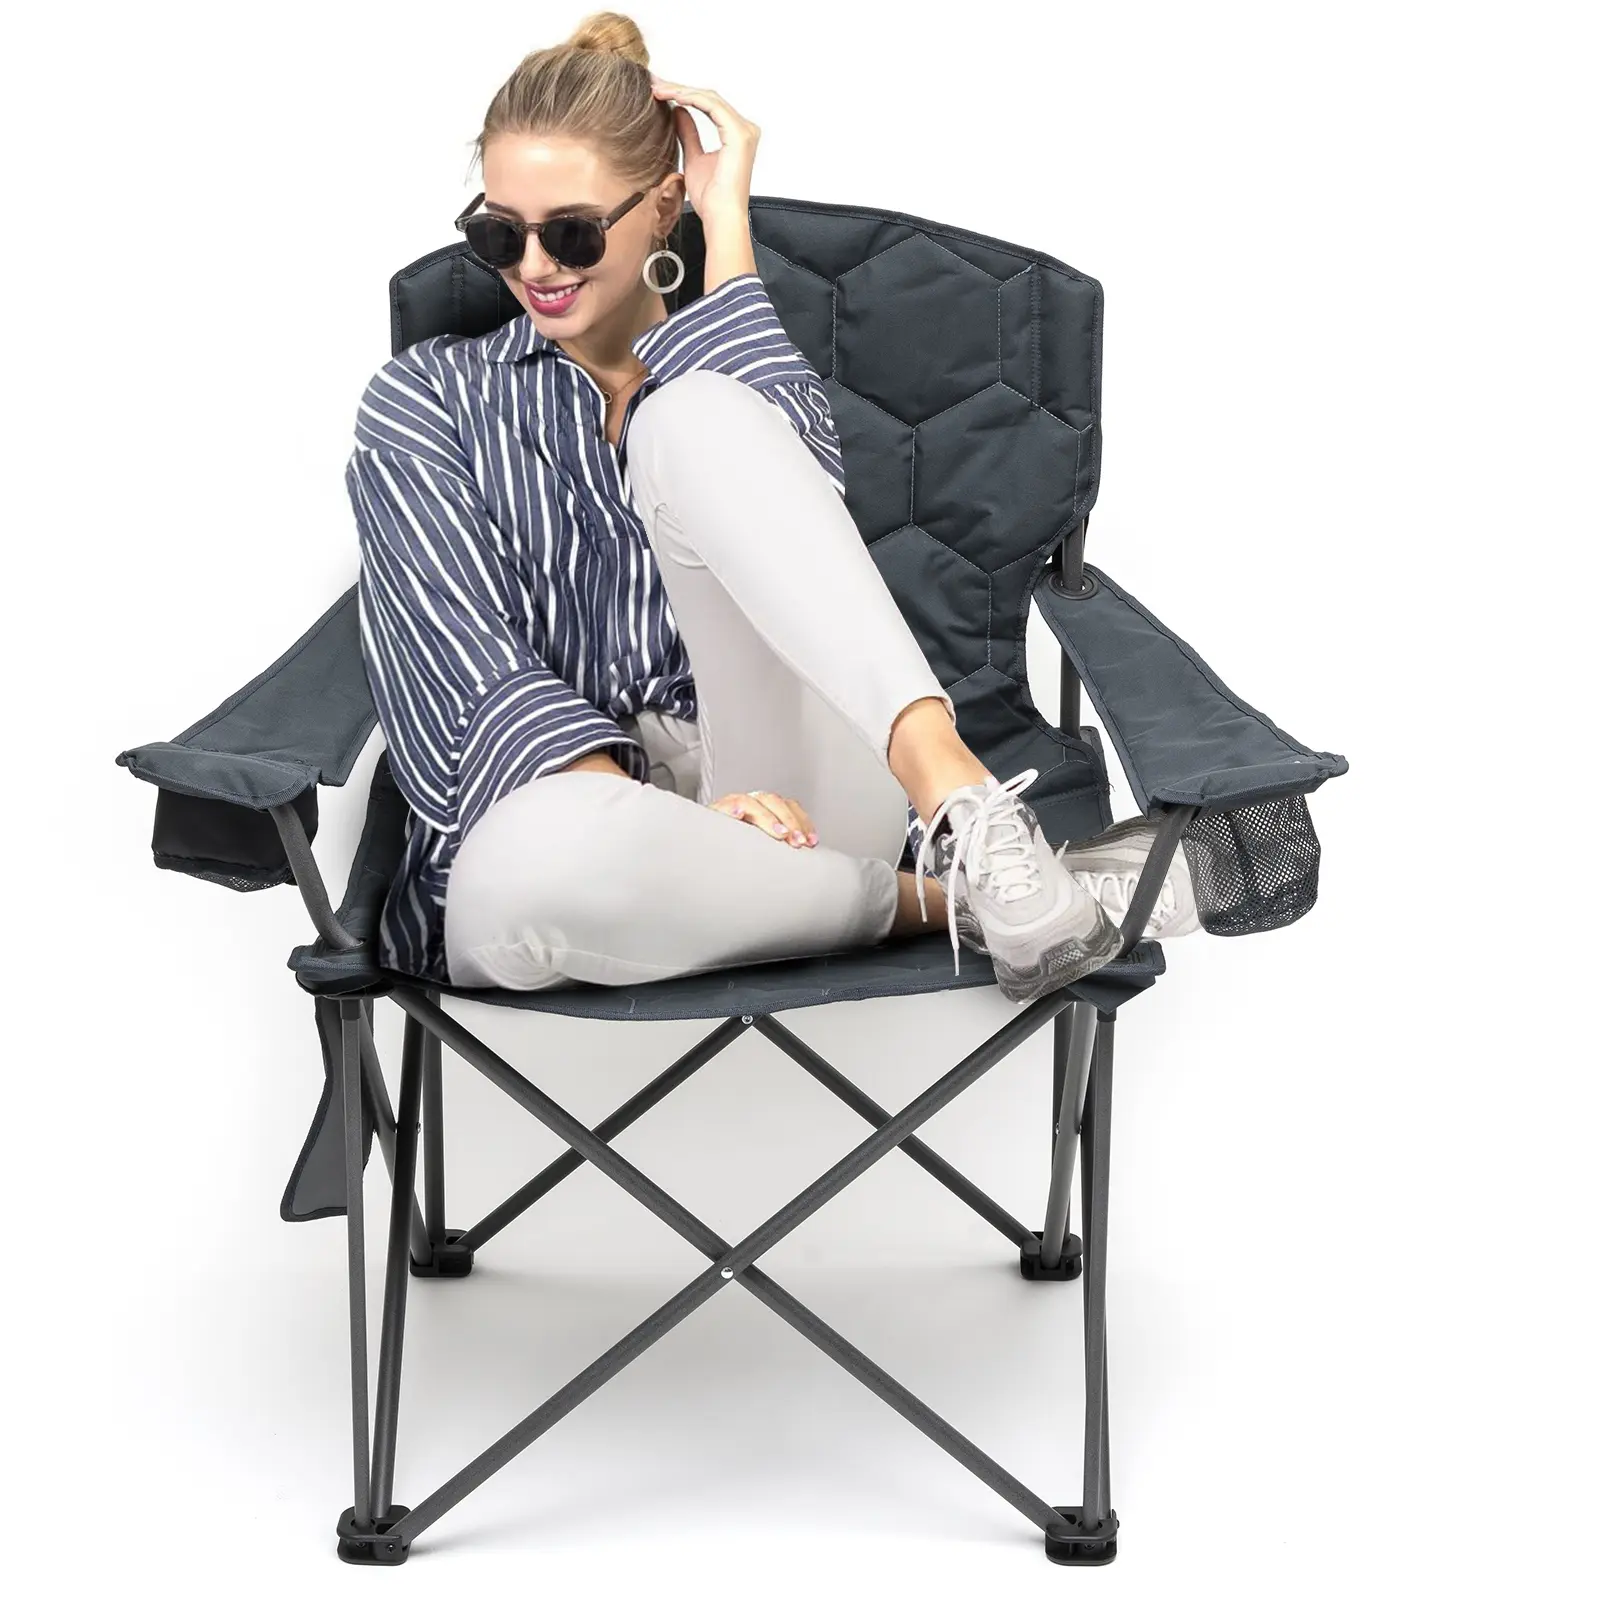 Oversized Folding Camping Chair with Cup Holder and Side Pocket